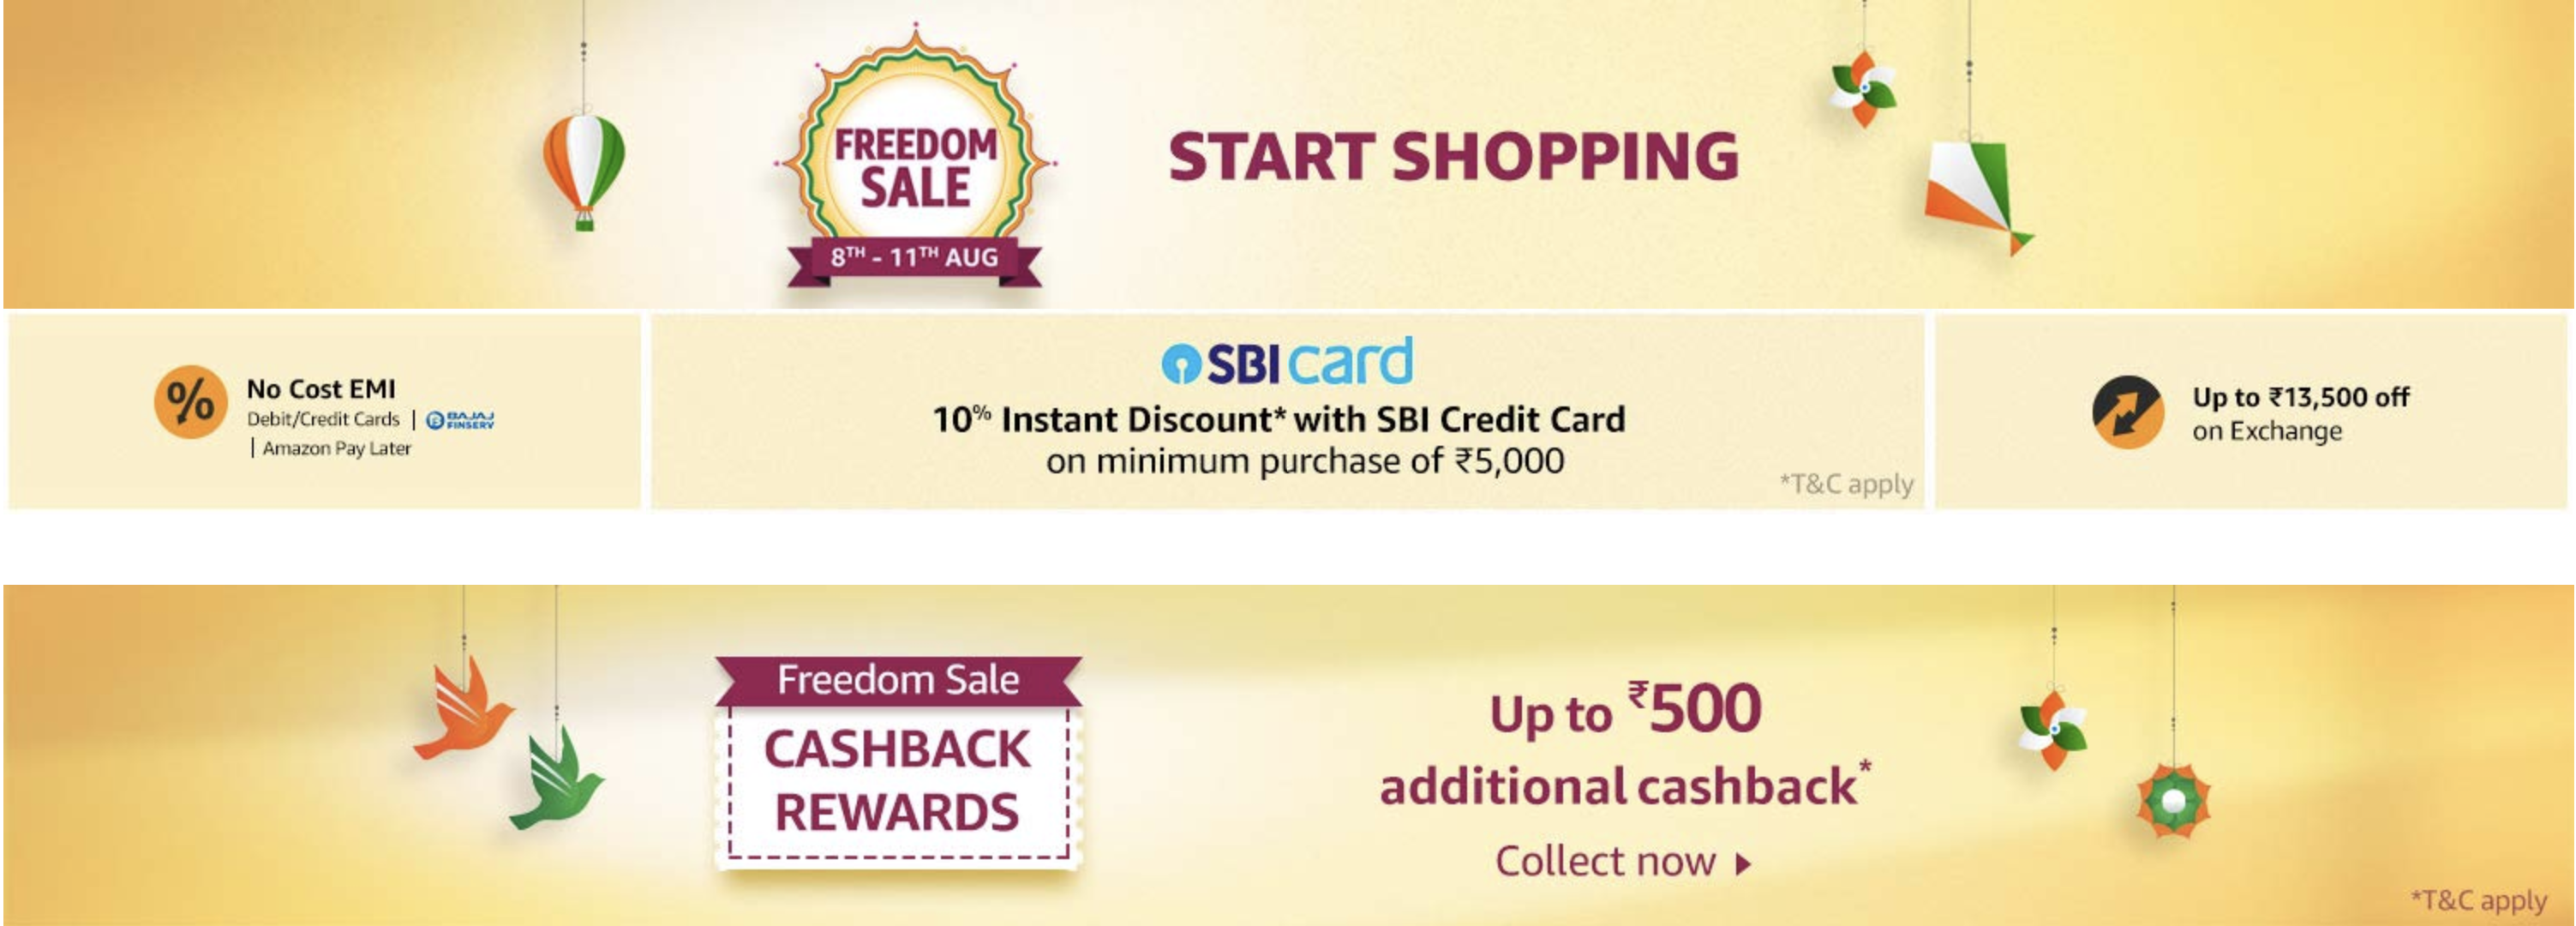 Amazon Freedom Sale | 8th to 11th August | 10% off on SBI card | Best deals available | 60% Off (app only)